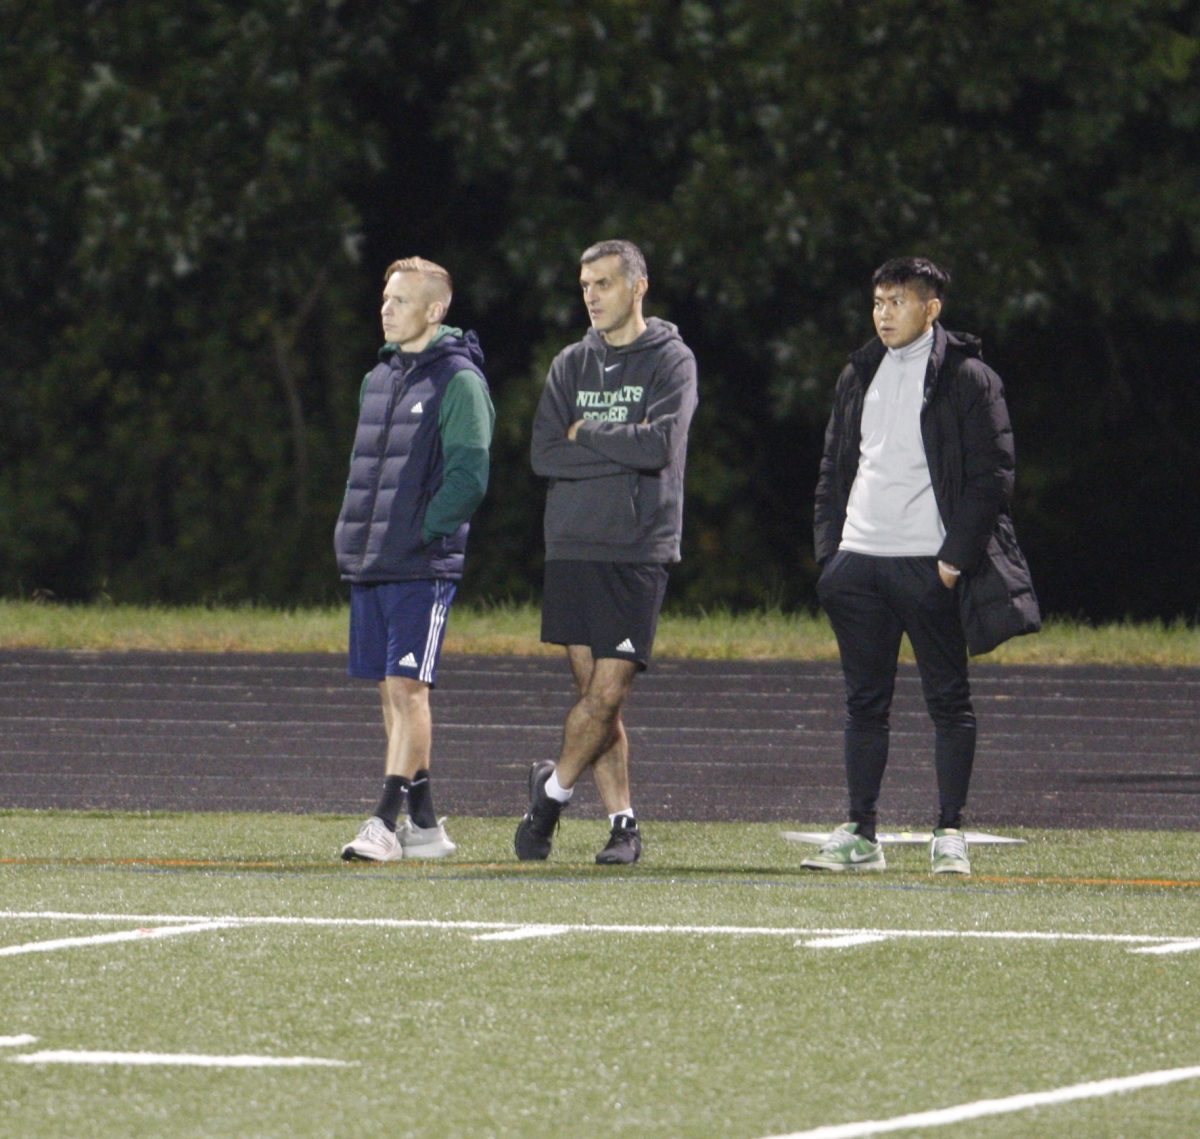 Alec Latifov (middle) watches WJ girls varsity soccer battle Whitman in their 2022 regular season conference match.  He stood alongside former head coach Joshua Kinnetz (left) and current assistant coach Fumie Takahashi (right) in his 27th season with WJ girls soccer.